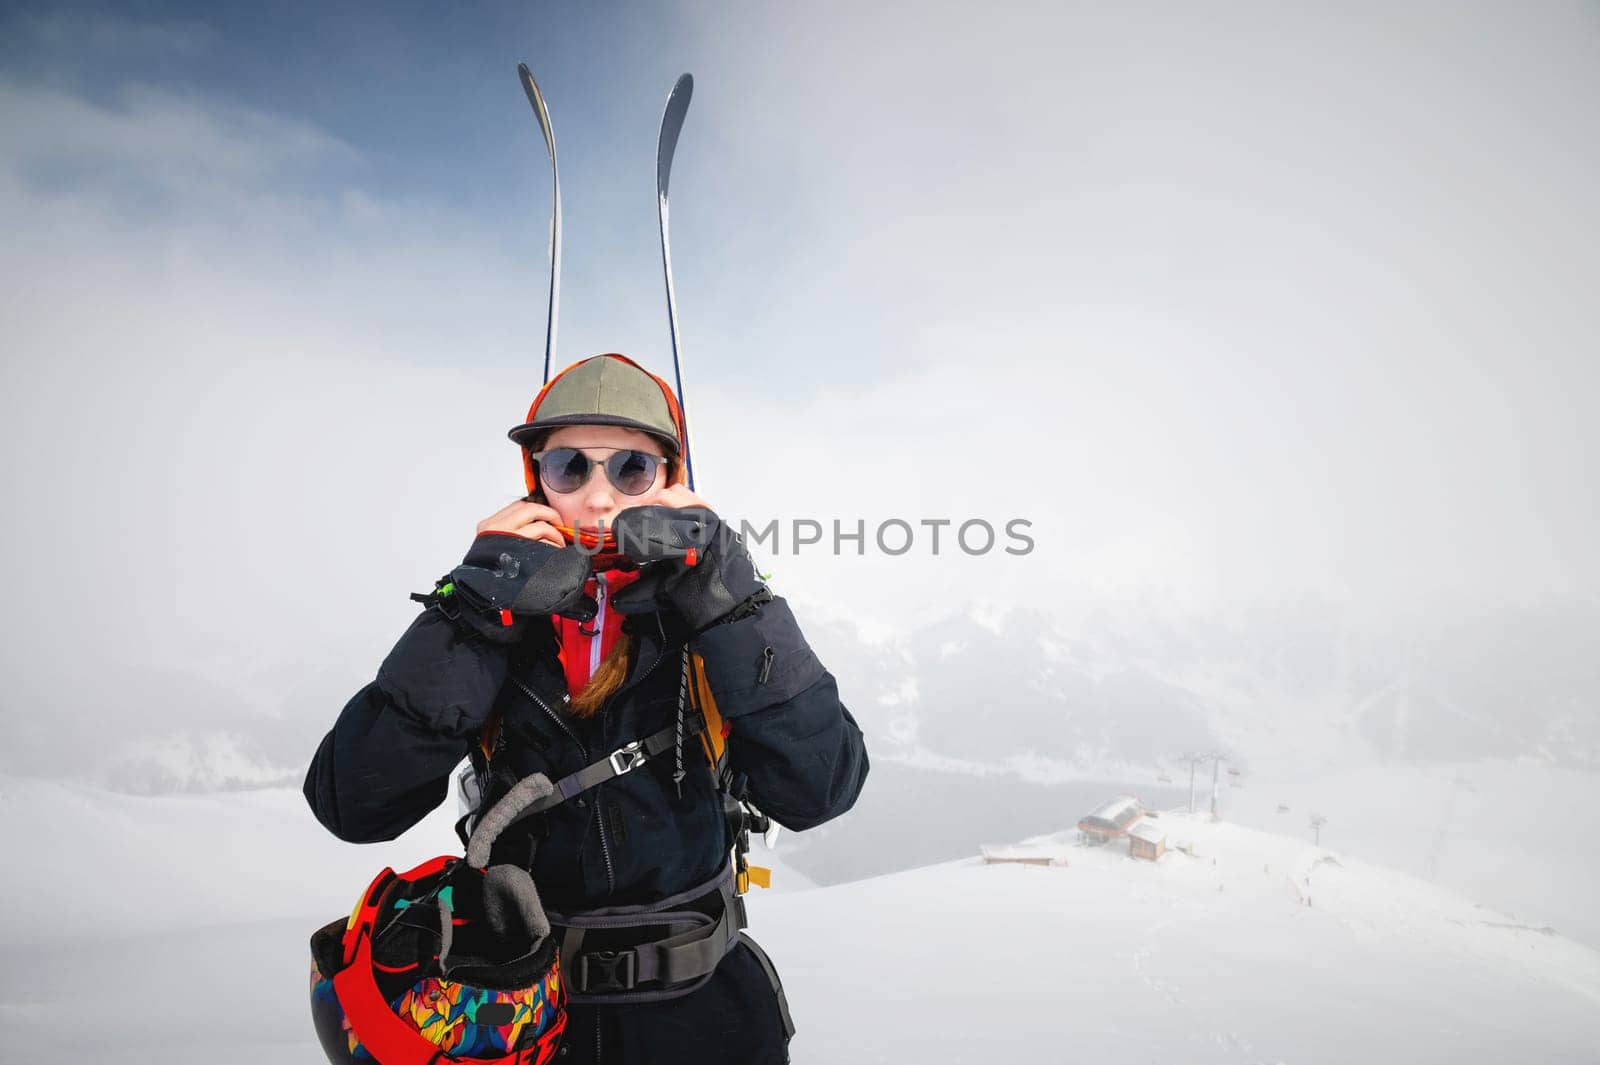 Mountaineer backcountry skiing skiing woman climber in the mountains. Ski tourism in the alpine landscape. Adventure winter sport. Freeride on skis by yanik88